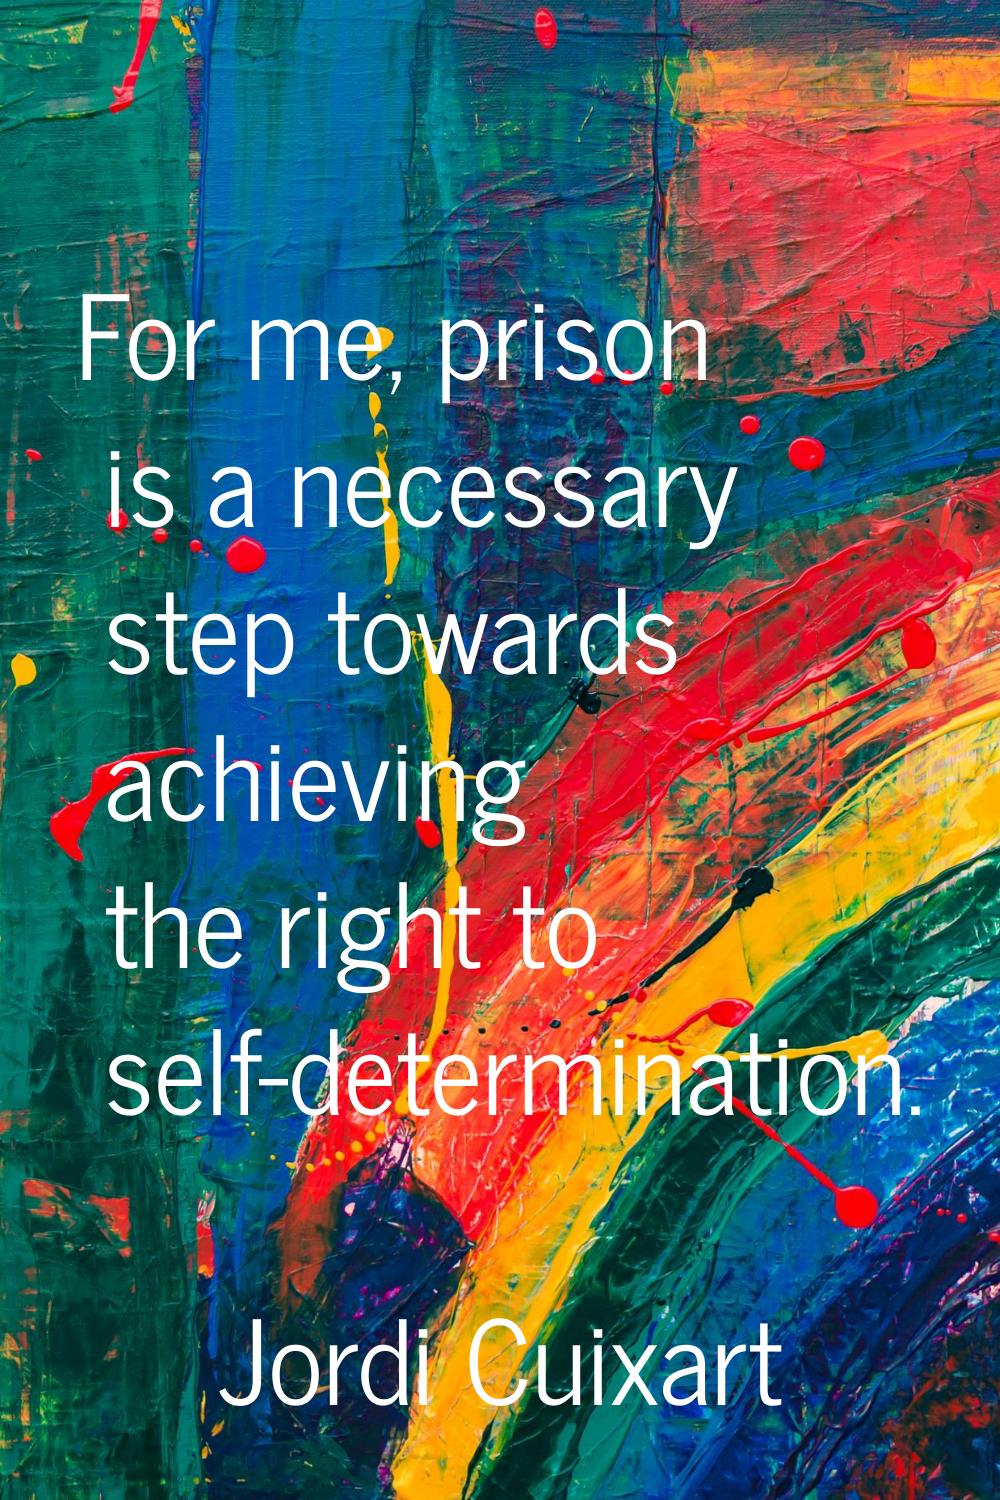 For me, prison is a necessary step towards achieving the right to self-determination.